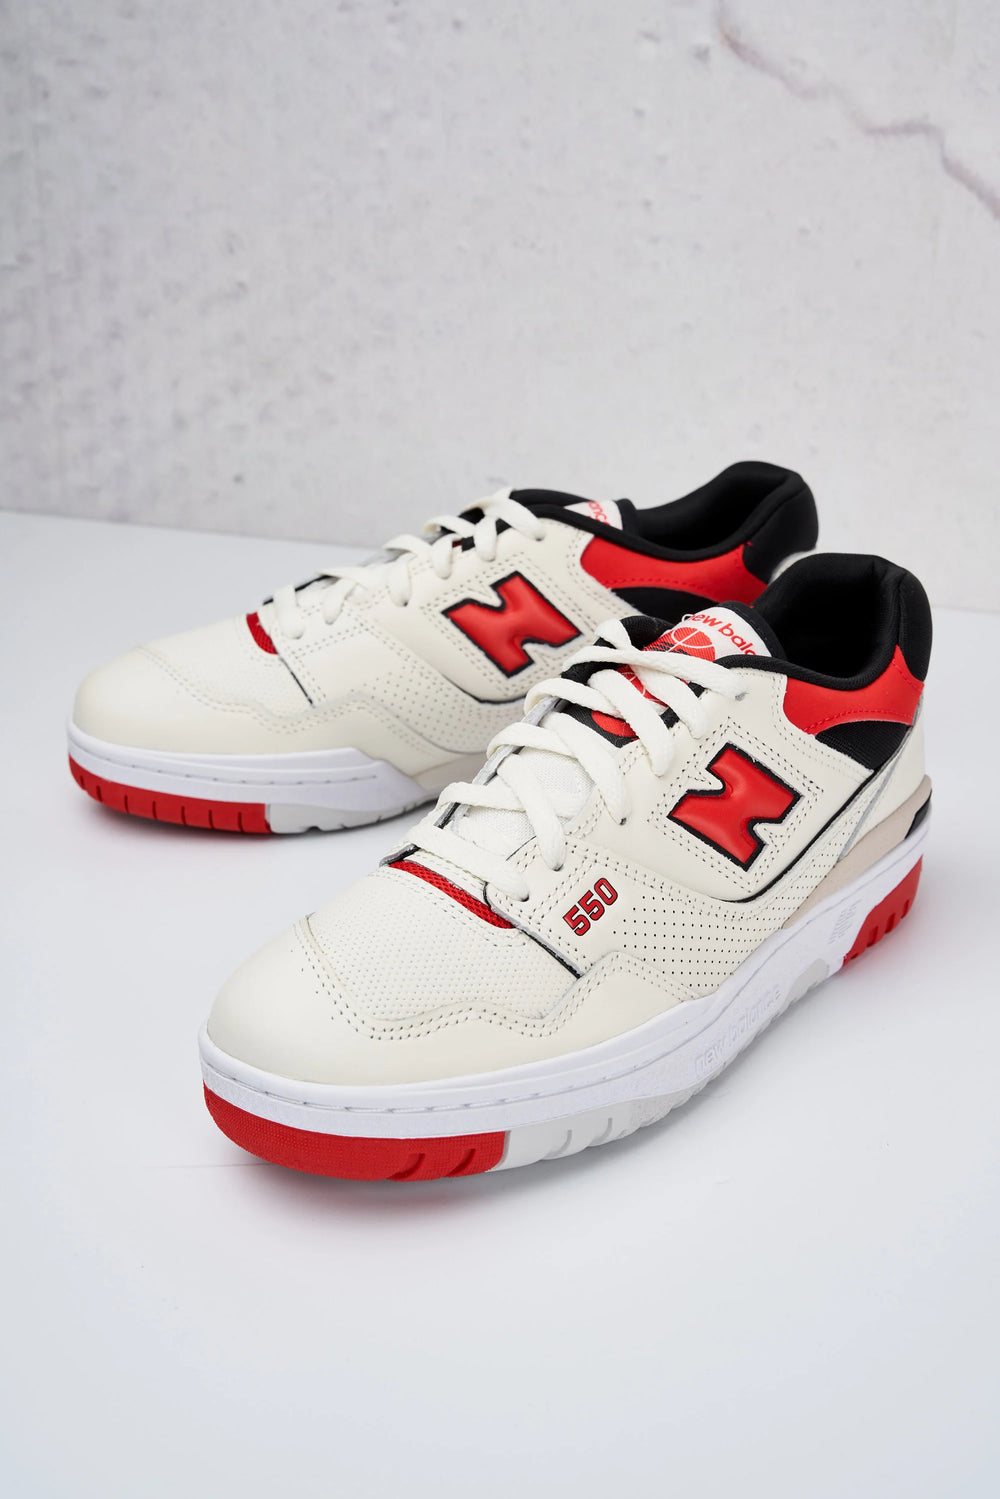 New Balance online the most searched models online